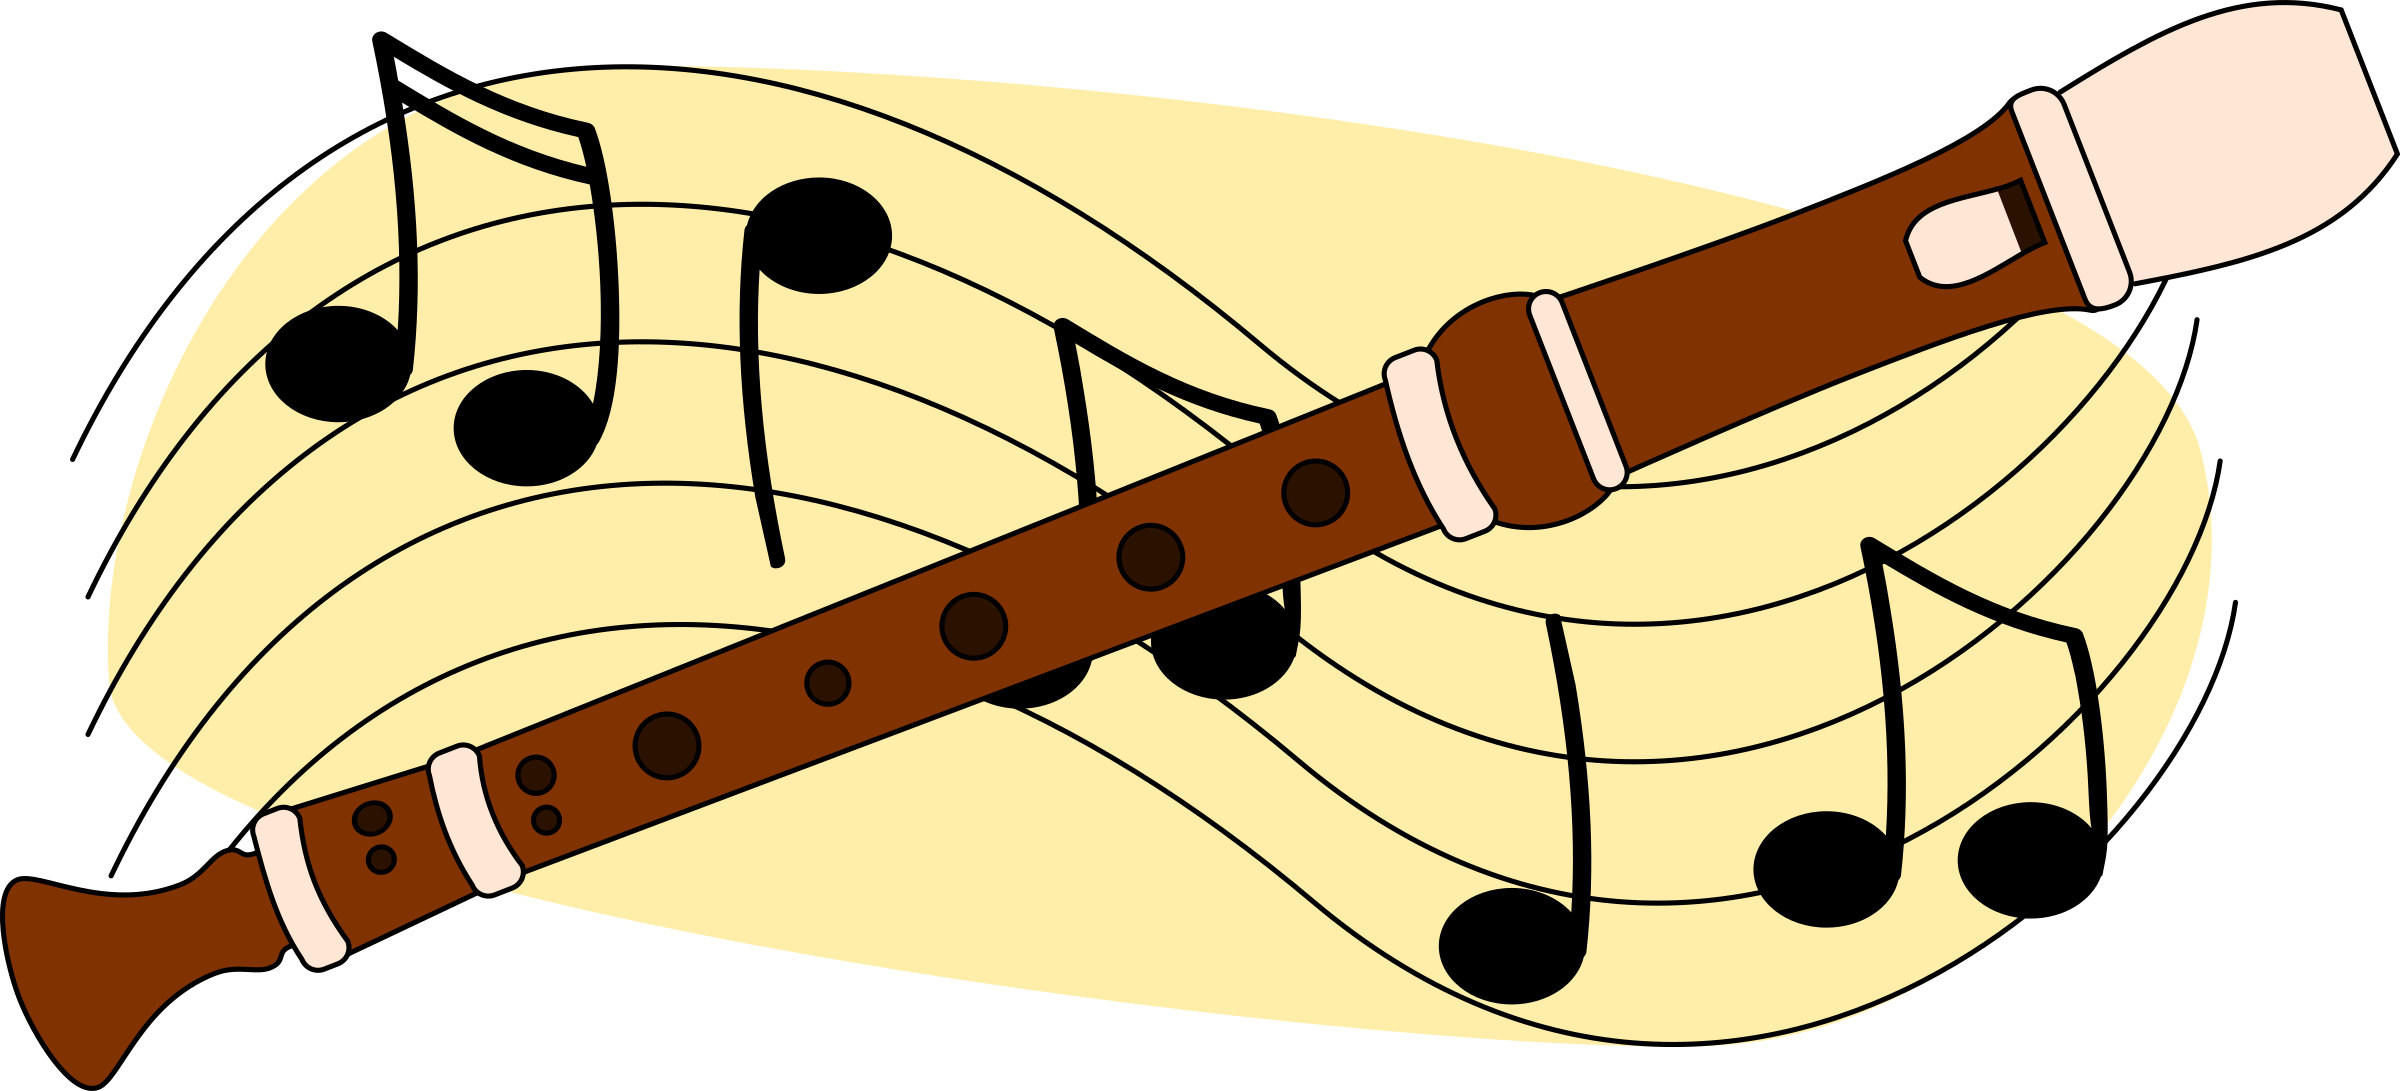 musician clipart orchestra indian